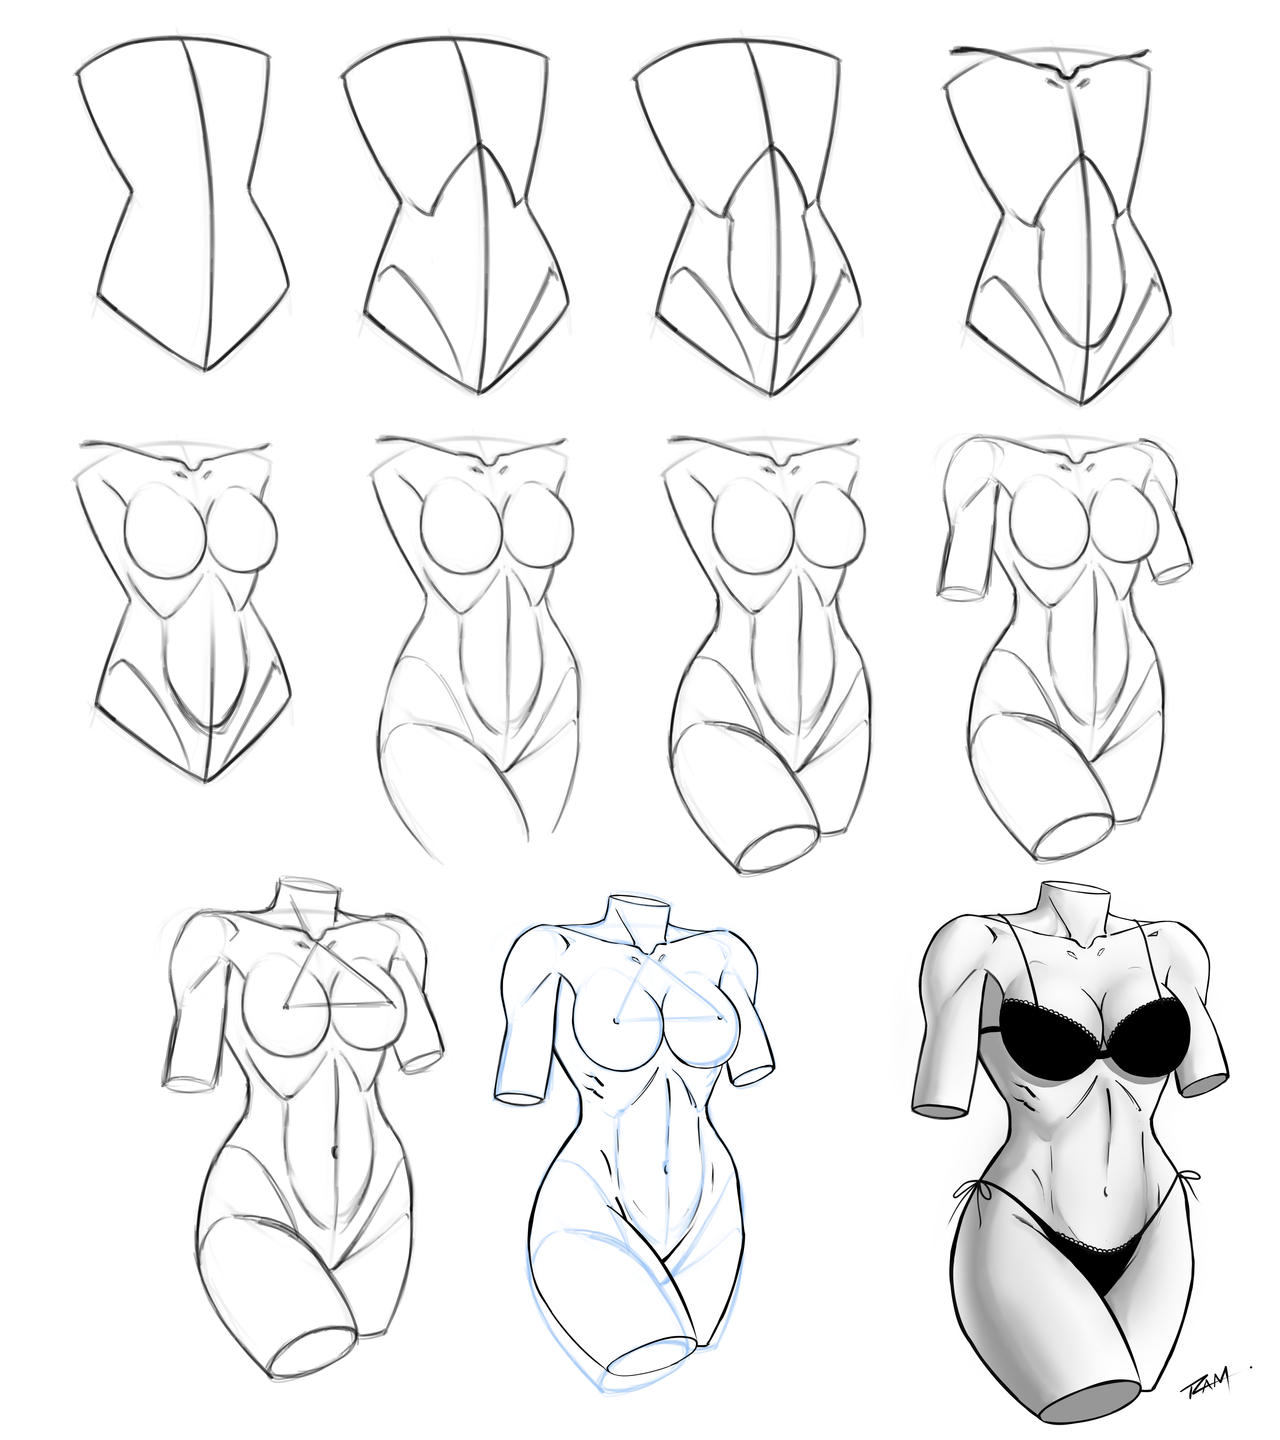 Drawing A Female Torso Step By Step Tutorial by robertmarzullo on